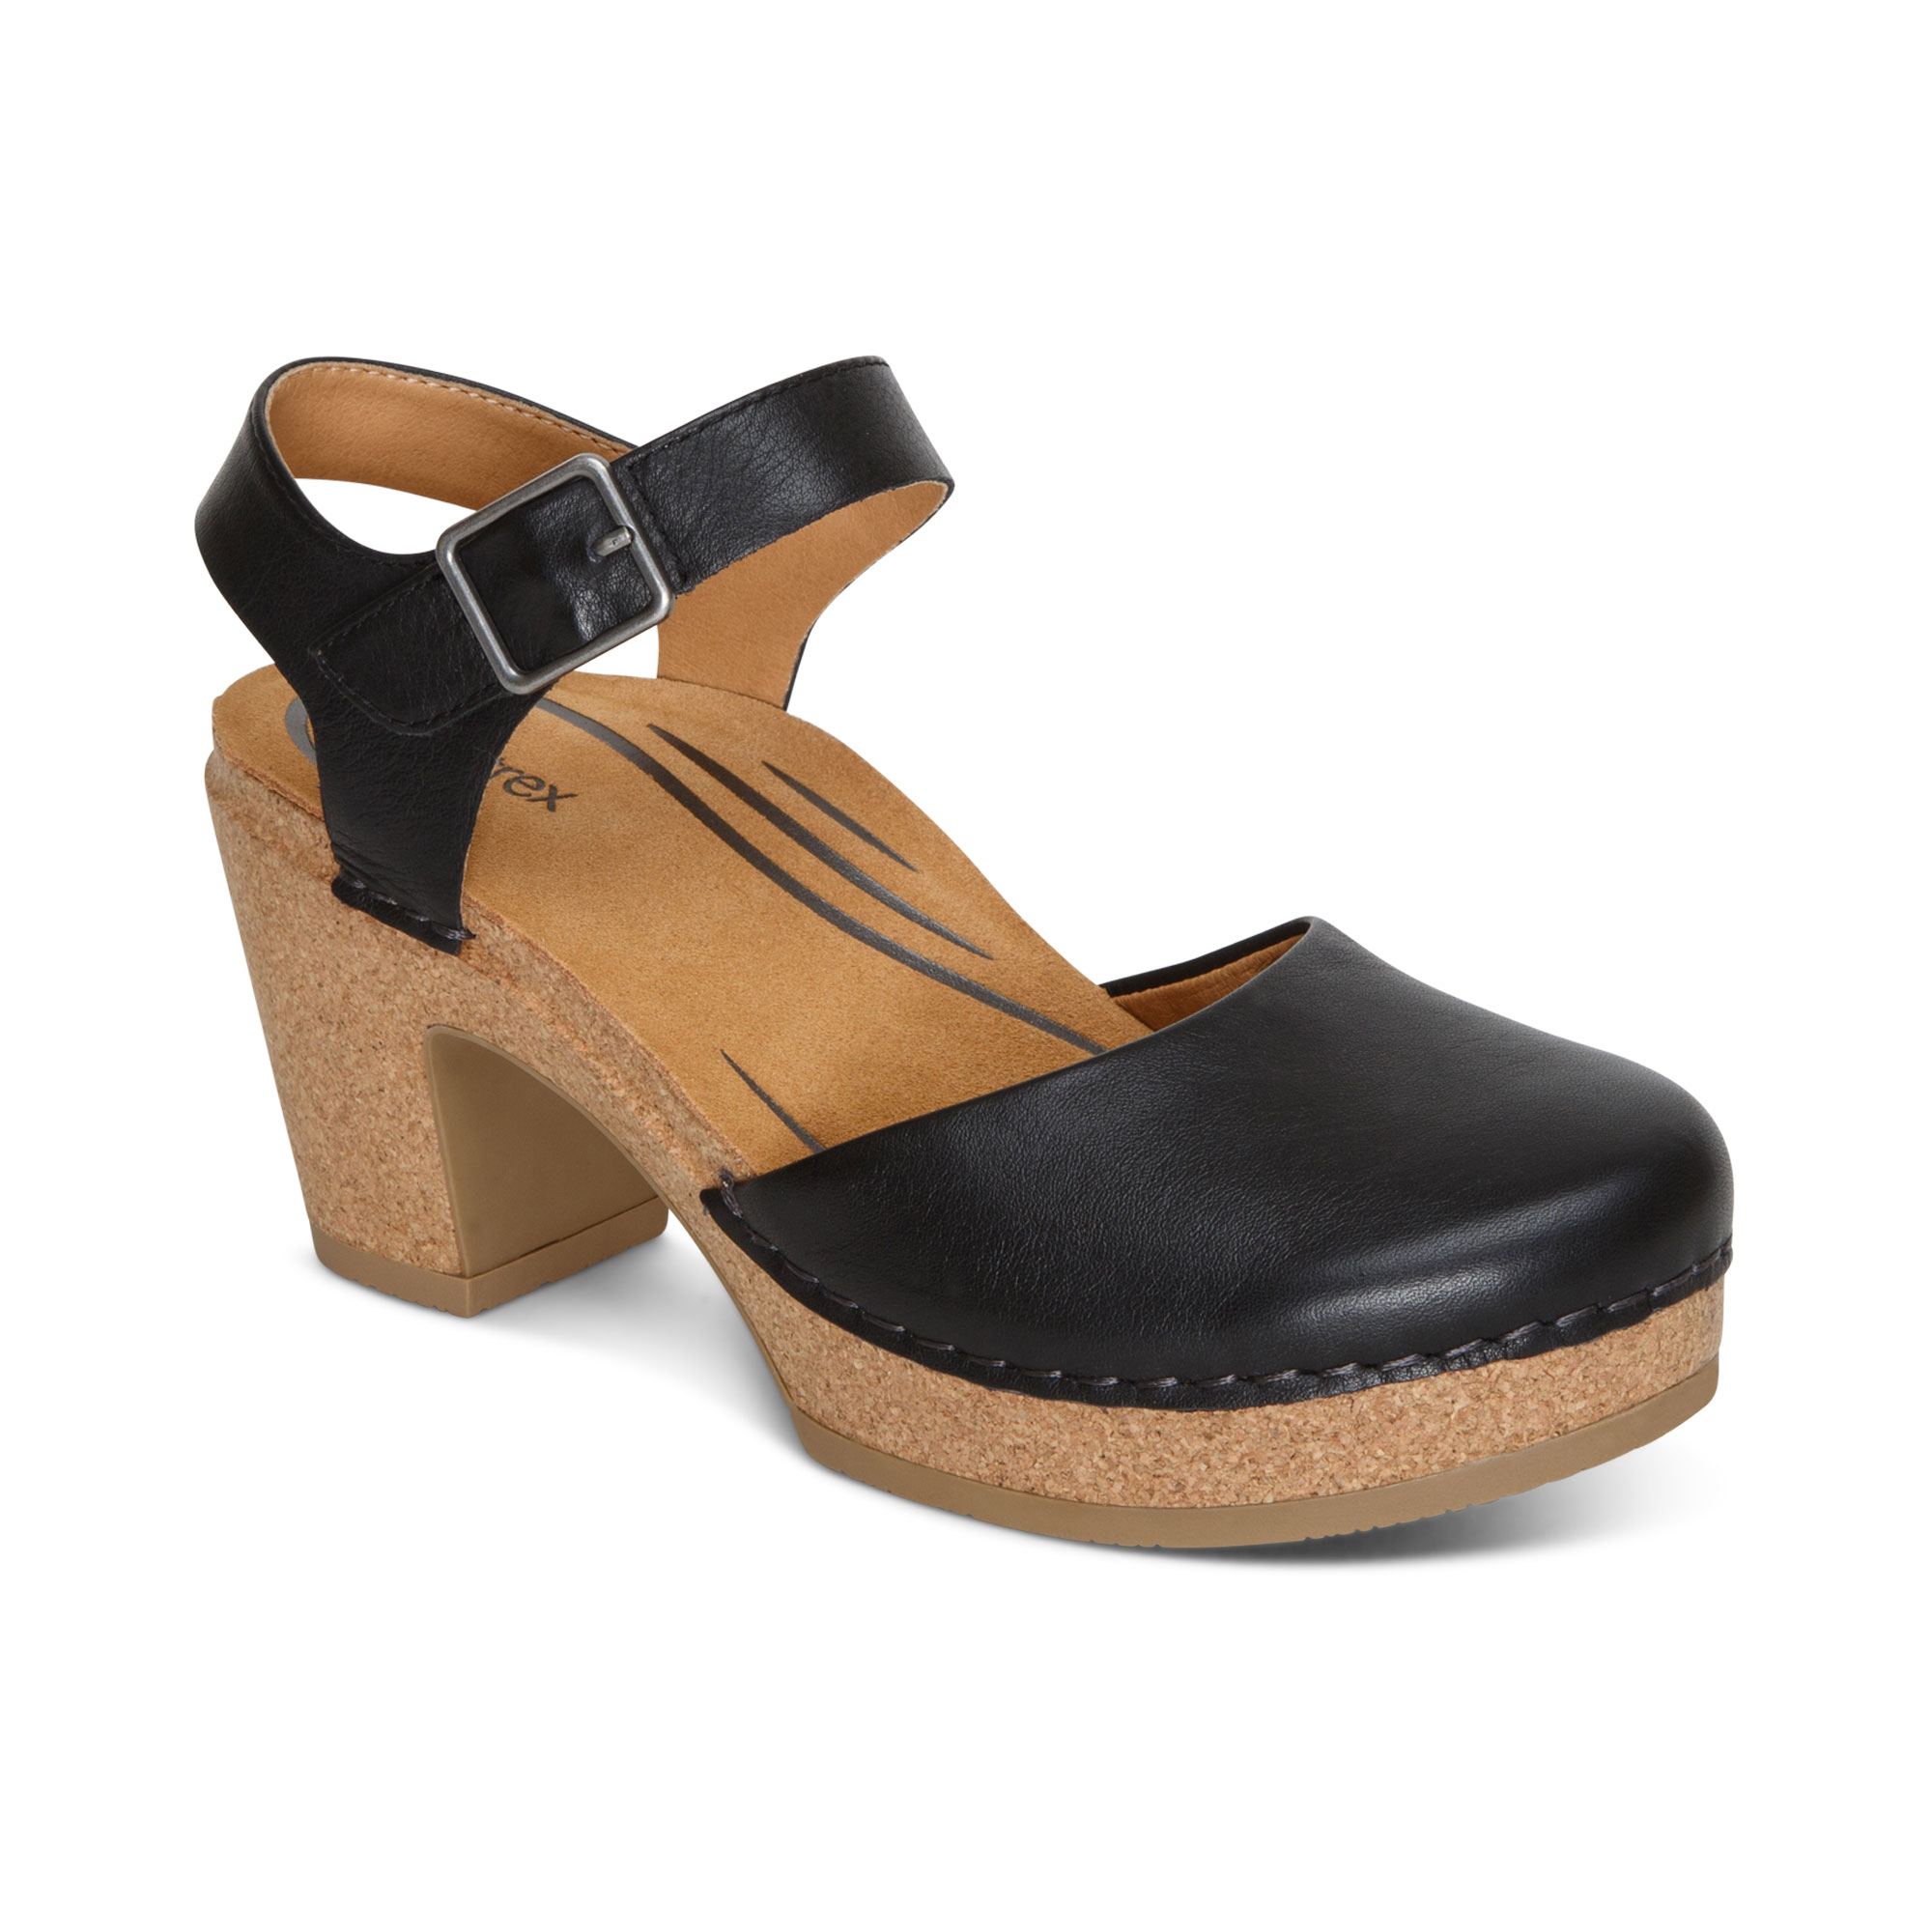 Lotta From Stockholm : Womens High Heel Cross Over Open Toe Wooden Clogs in  Black Leather on a Brown Base